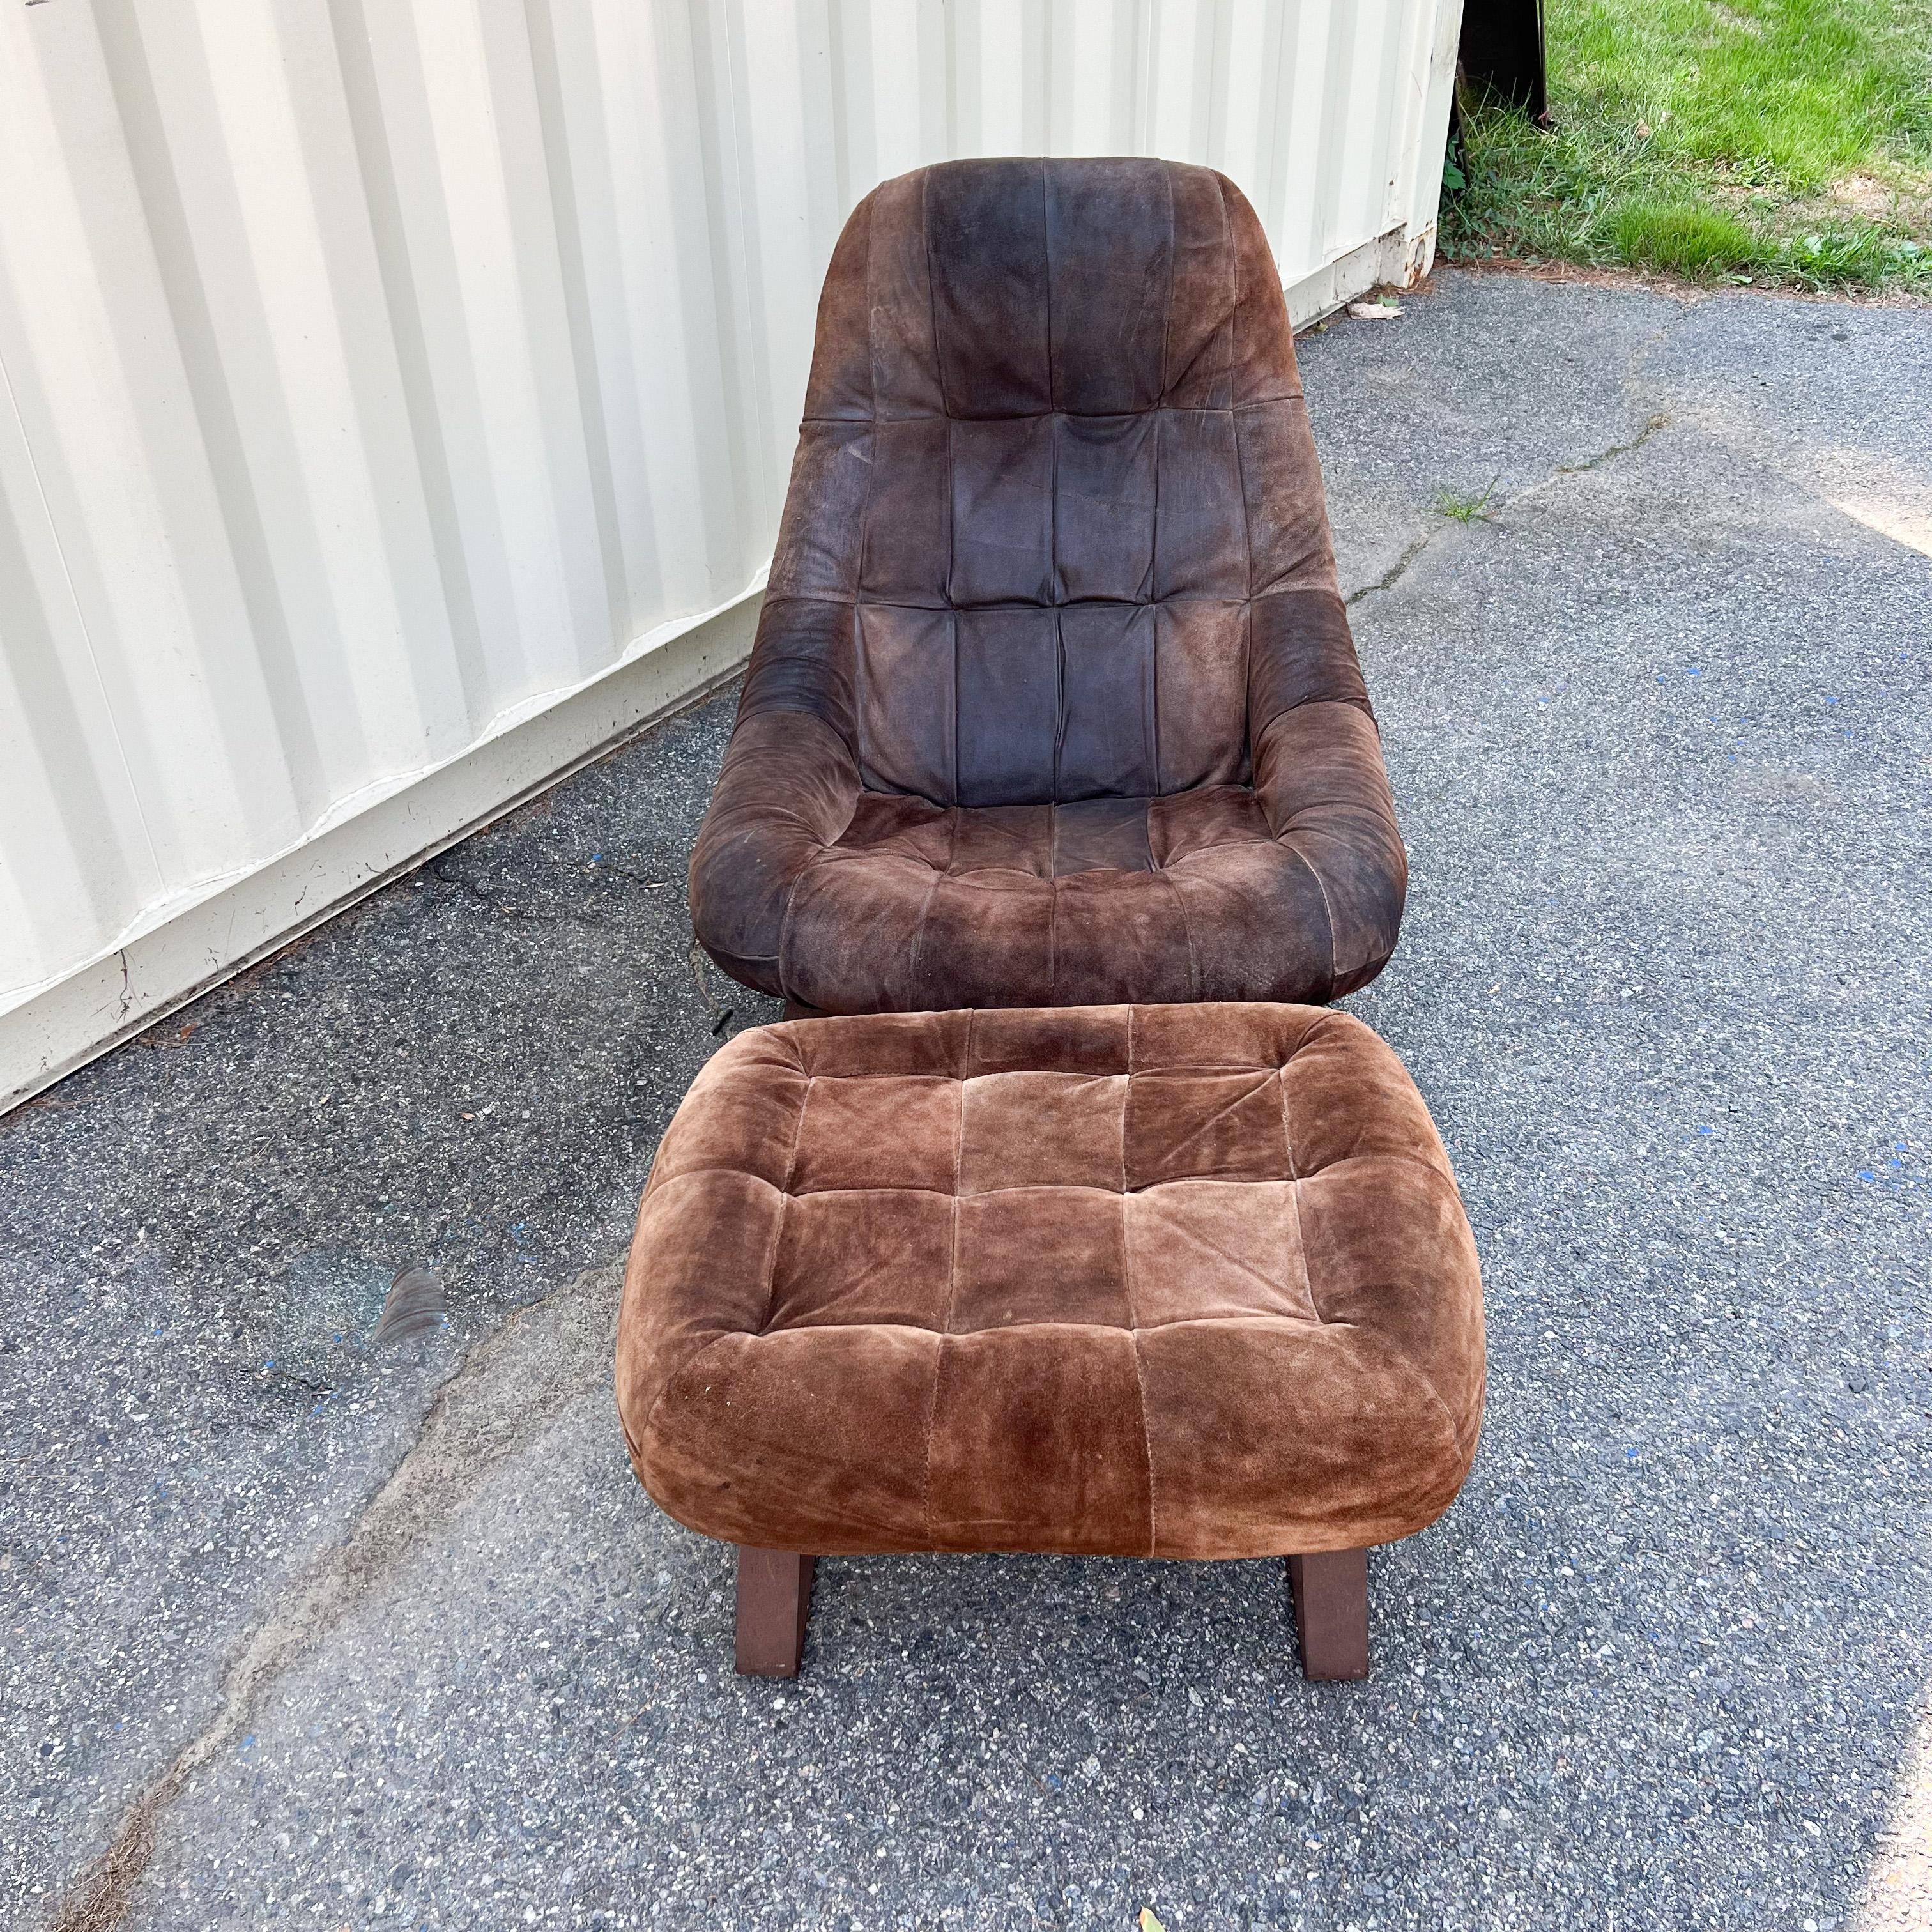 Mid-Century Modern Earth lounge chair and ottoman with original suede upholstery. Designed by Brazilian designer, Percival Lafer. The ottoman is a lighter brown hue than the chair. Some scuffing/fading/wear to the chair and ottoman as seen in